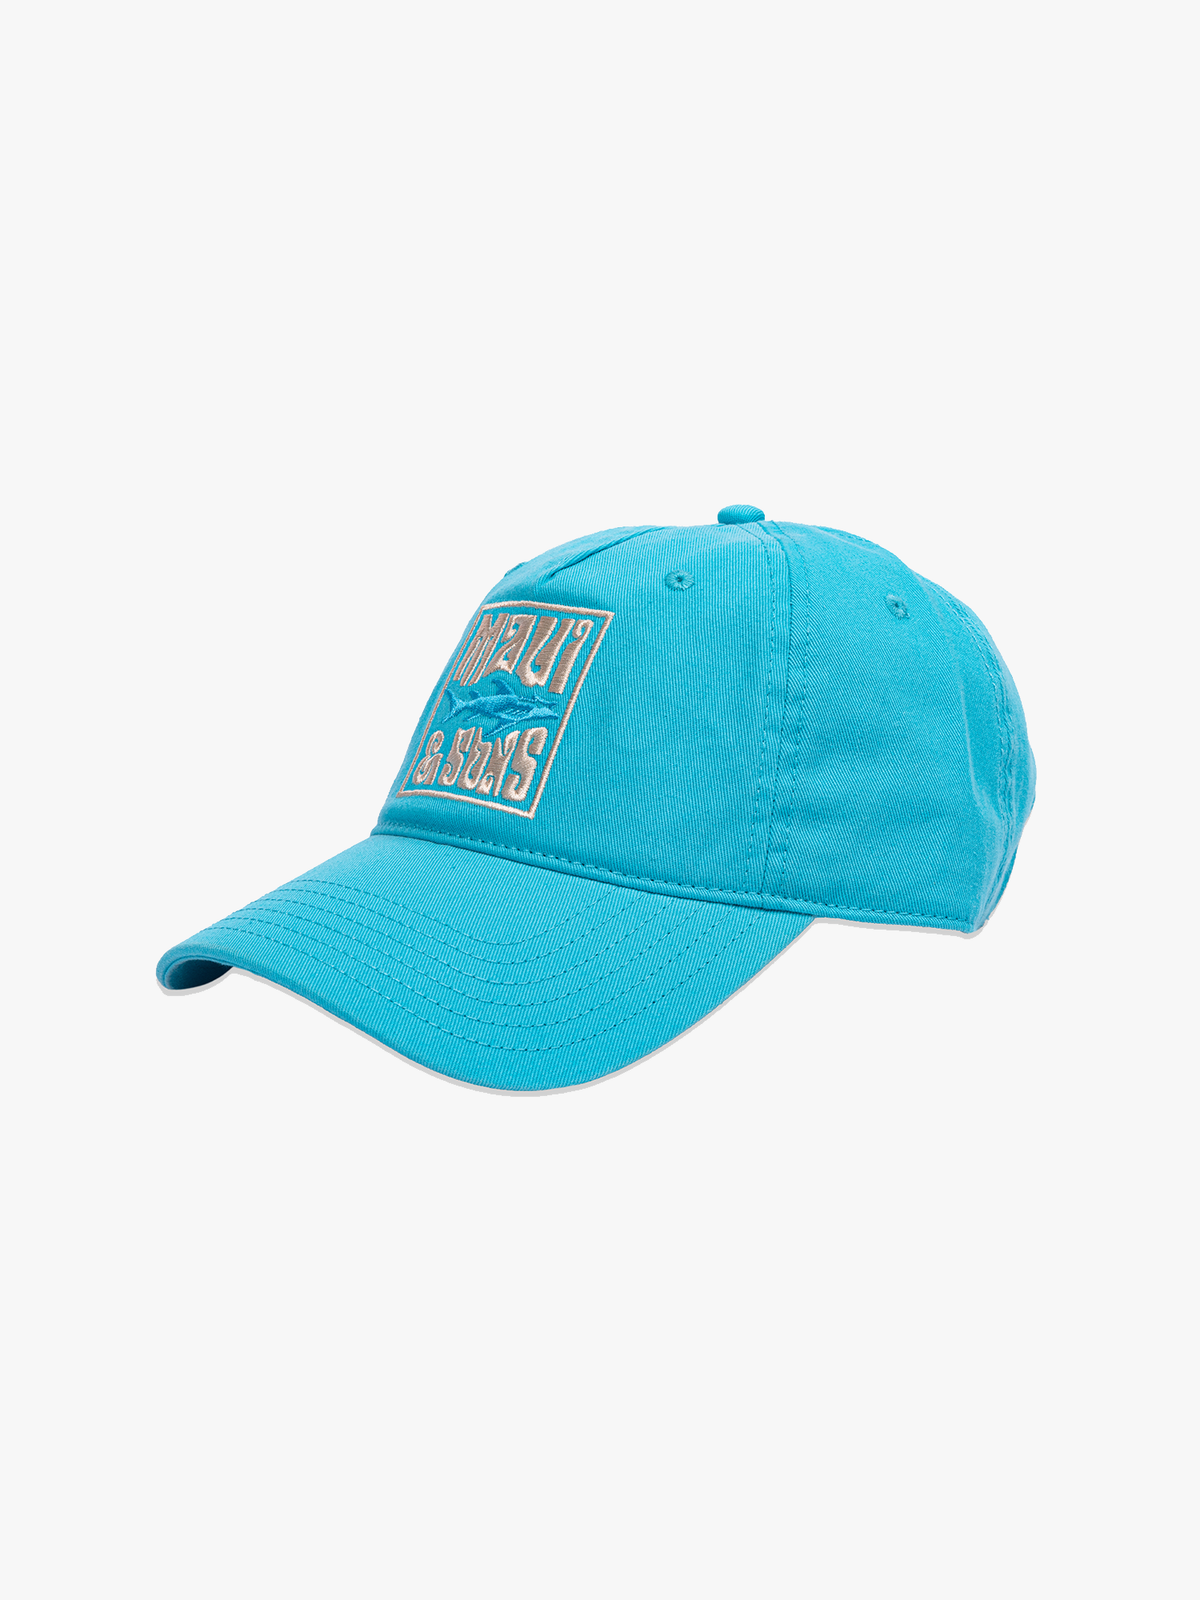 Psych Surf Dad Hat | Maui and Sons